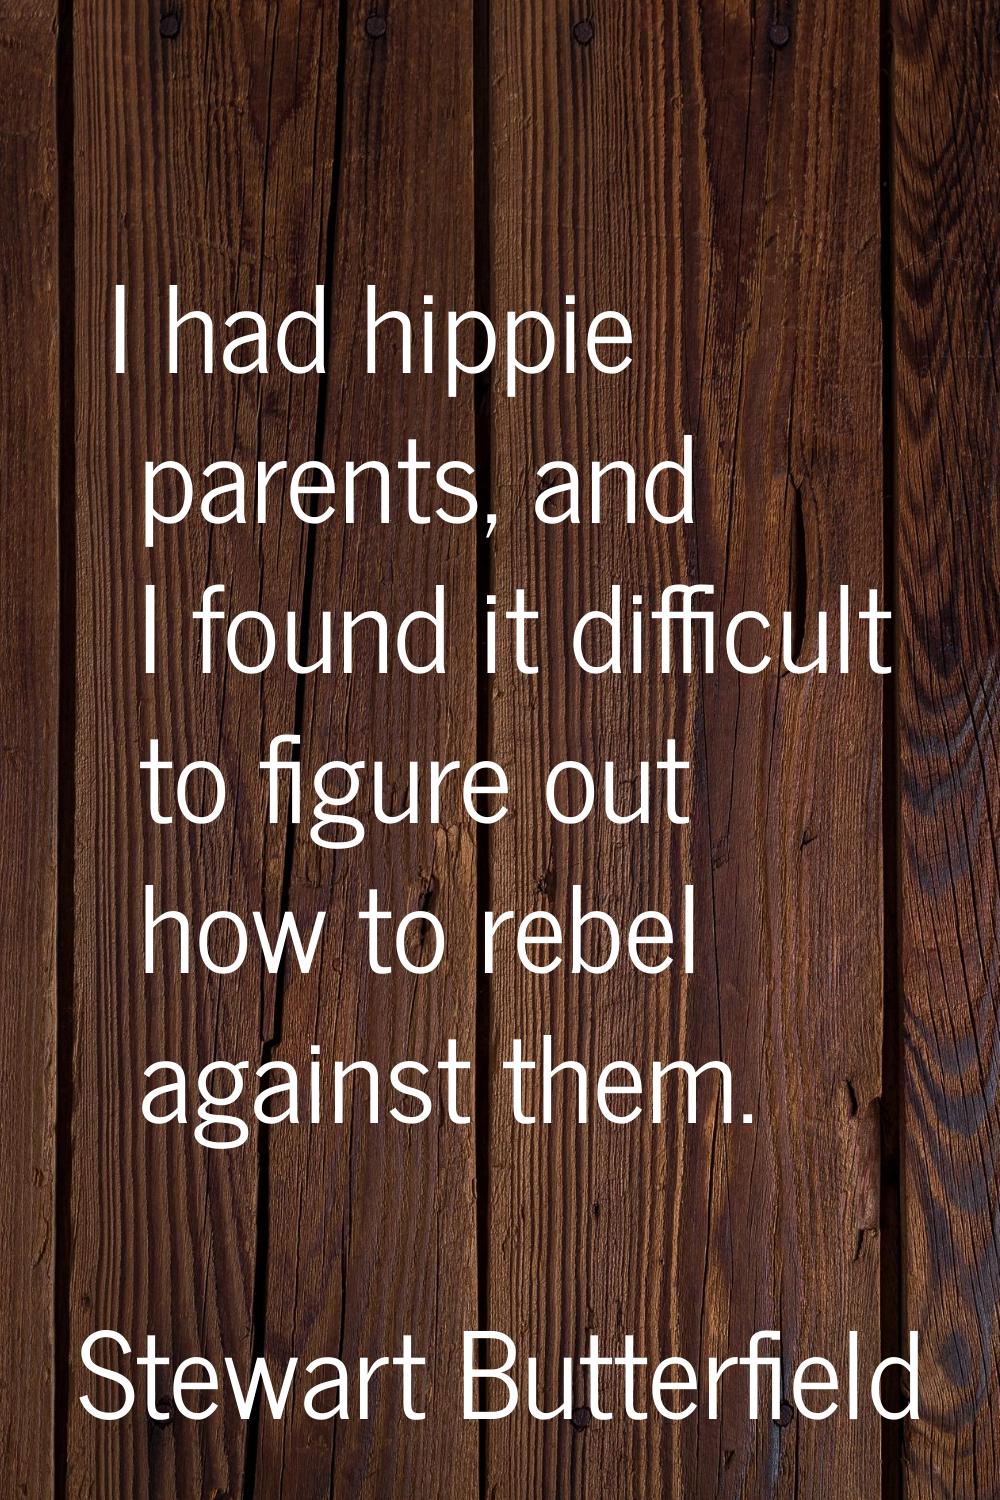 I had hippie parents, and I found it difficult to figure out how to rebel against them.